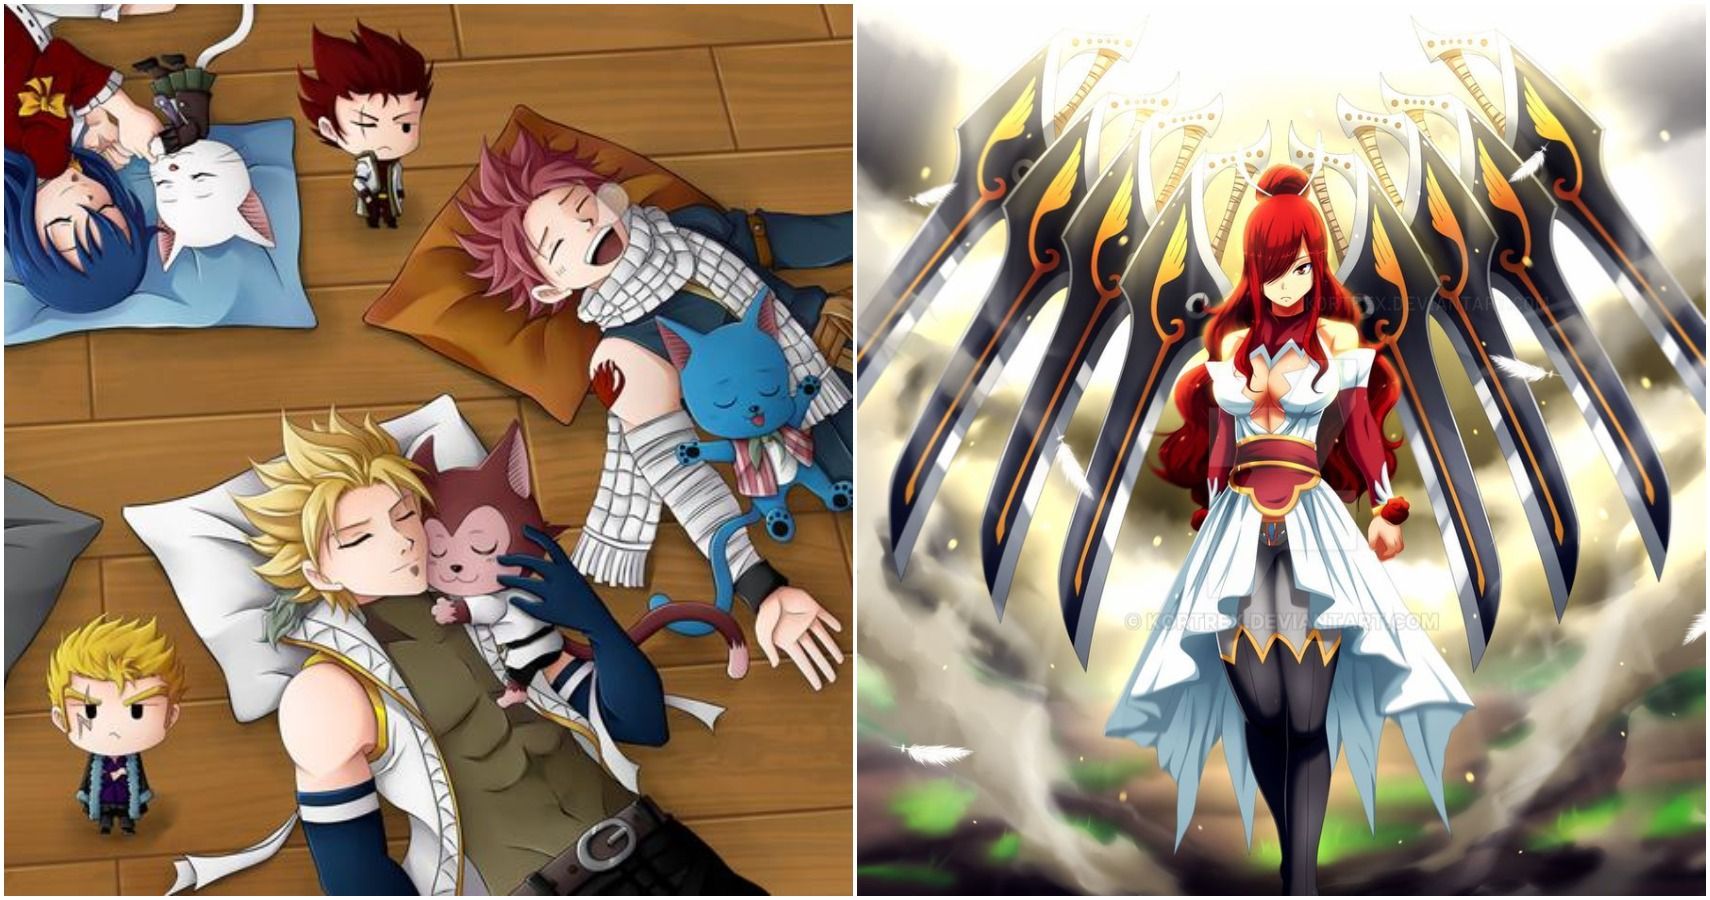 audrey jantjies recommends fairy tail fan art pic